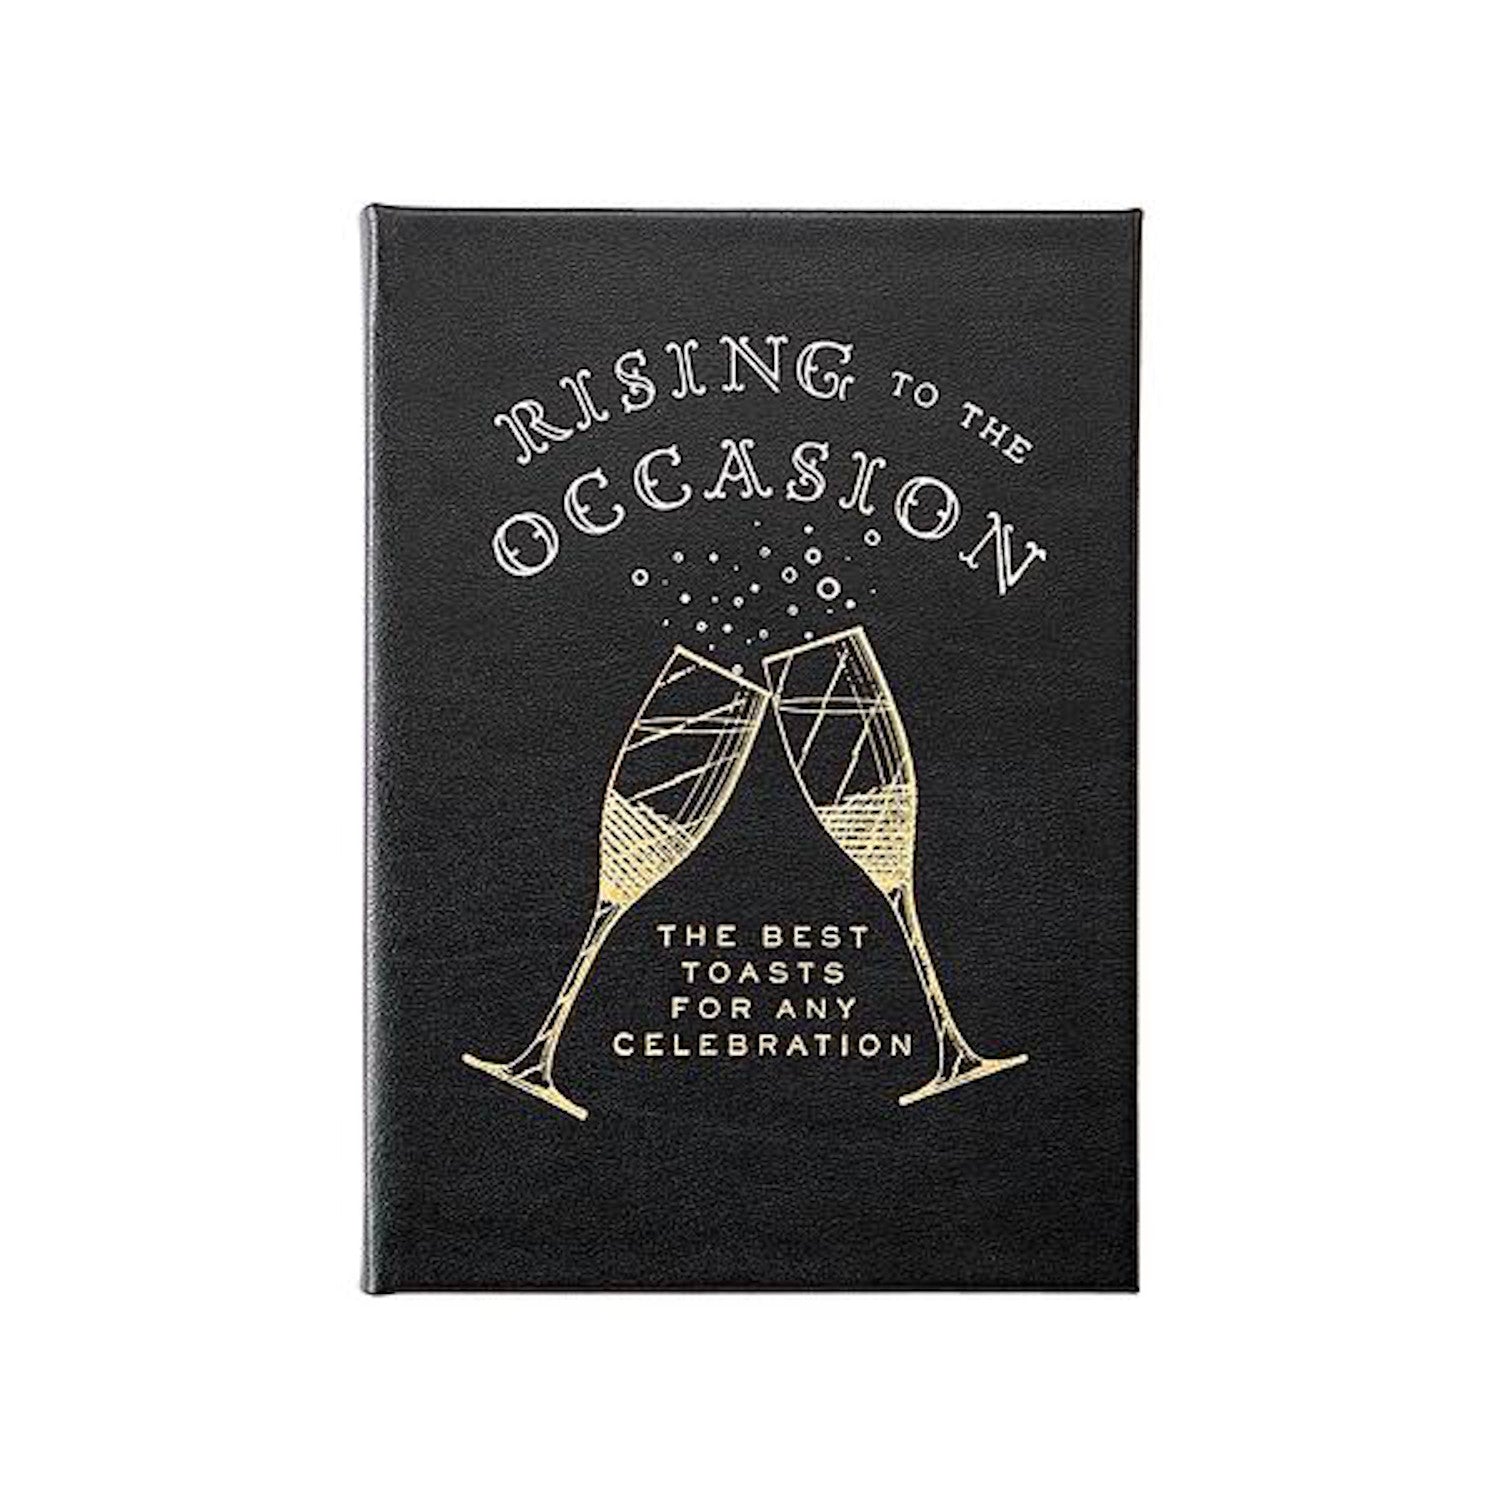 A black book titled &quot;Rising to the Occasion: Celebration Toasts for Any Celebration&quot; with an illustration of two clinking champagne glasses can be found in the Rising to the Occassion, Black Bonded Leather by Graphic Image.